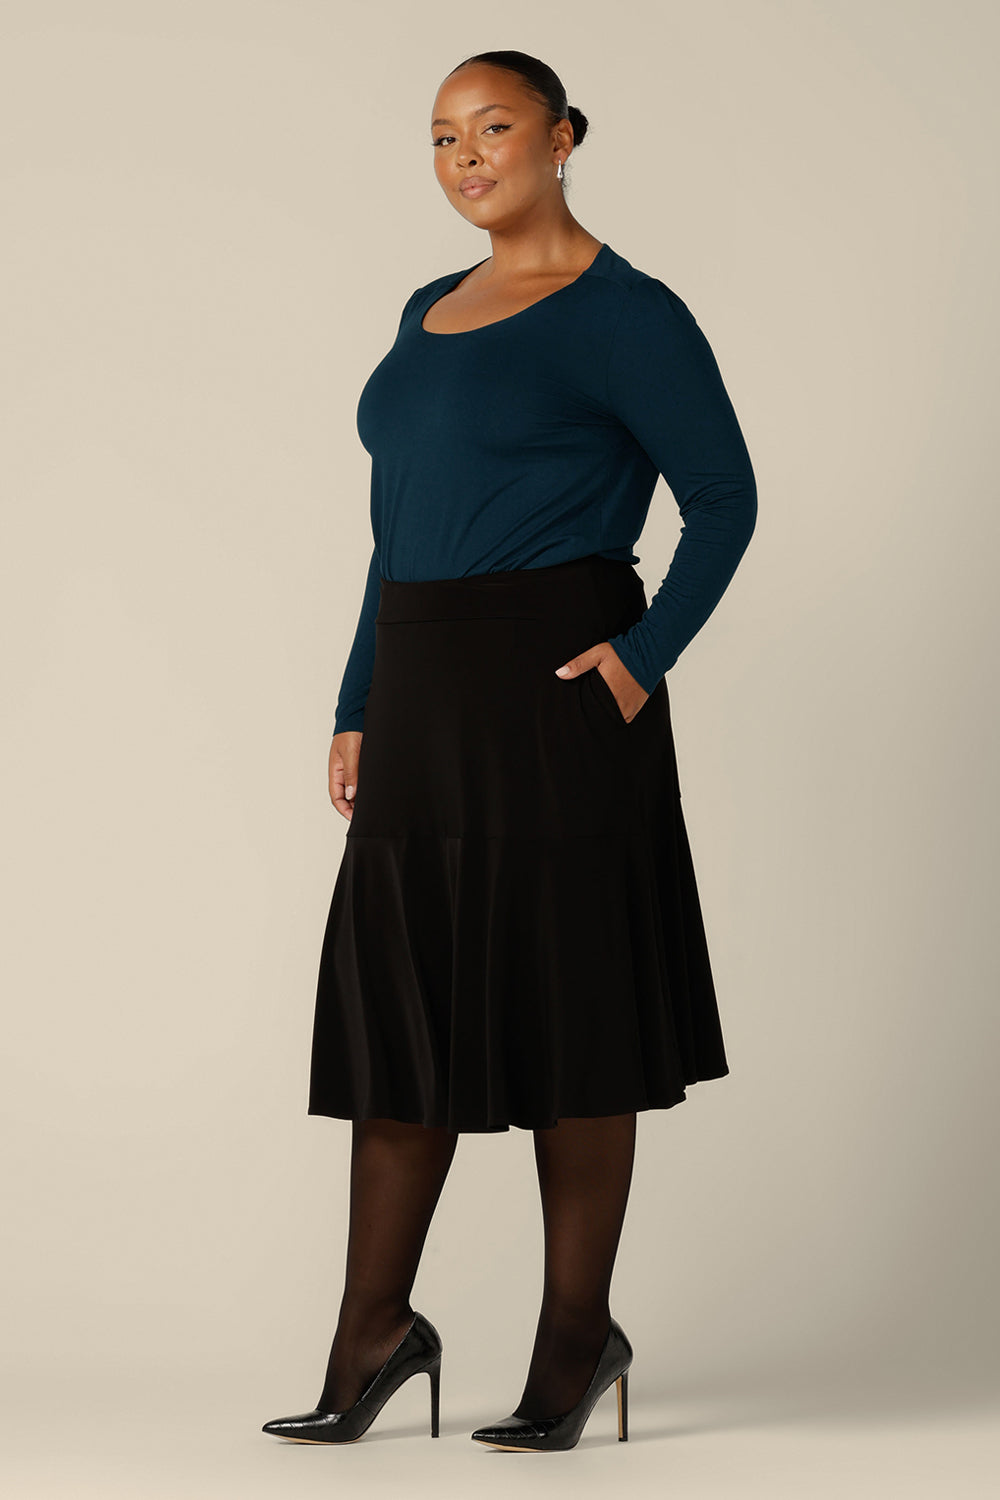 A plus size woman wears a pull on, black skirt with knee-length ruffle hemline and side pockets. This black skirt is a comfortable skirt for workwear or smart-casual wear.